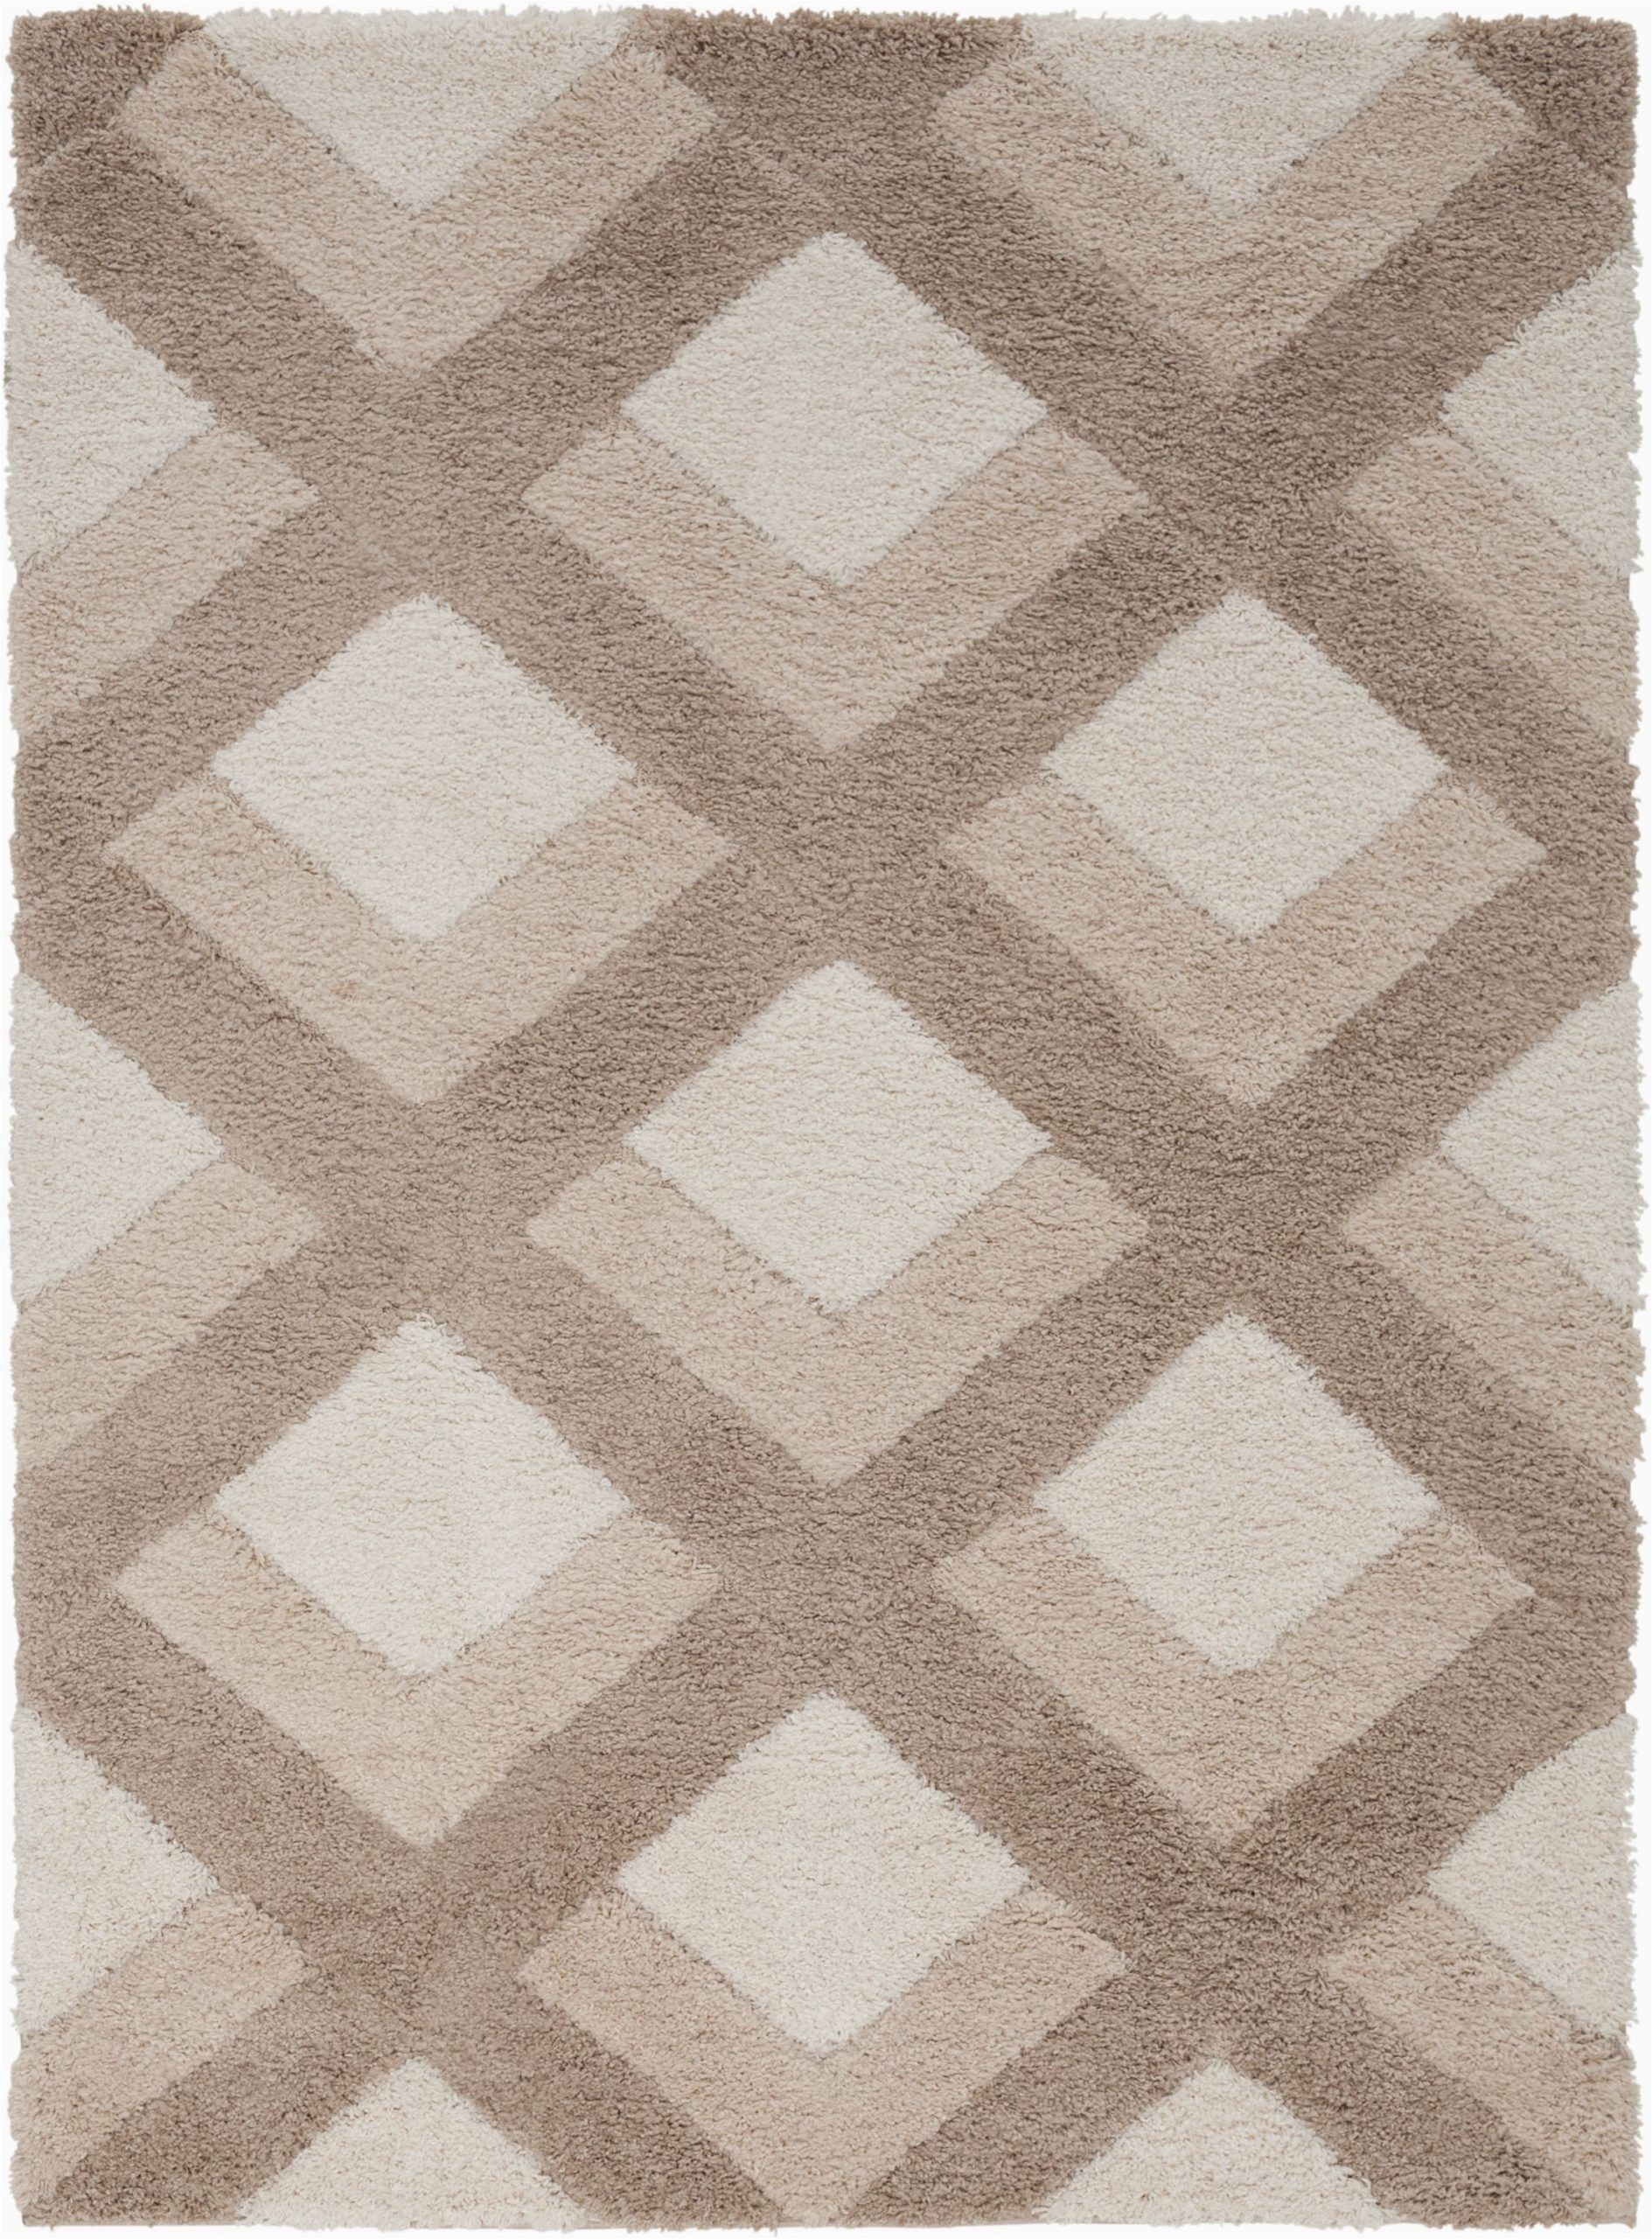 Better Homes and Gardens 5×7 area Rugs Better Homes & Gardens 5 X 7 High Low Diamond Shag area Rug Walmart